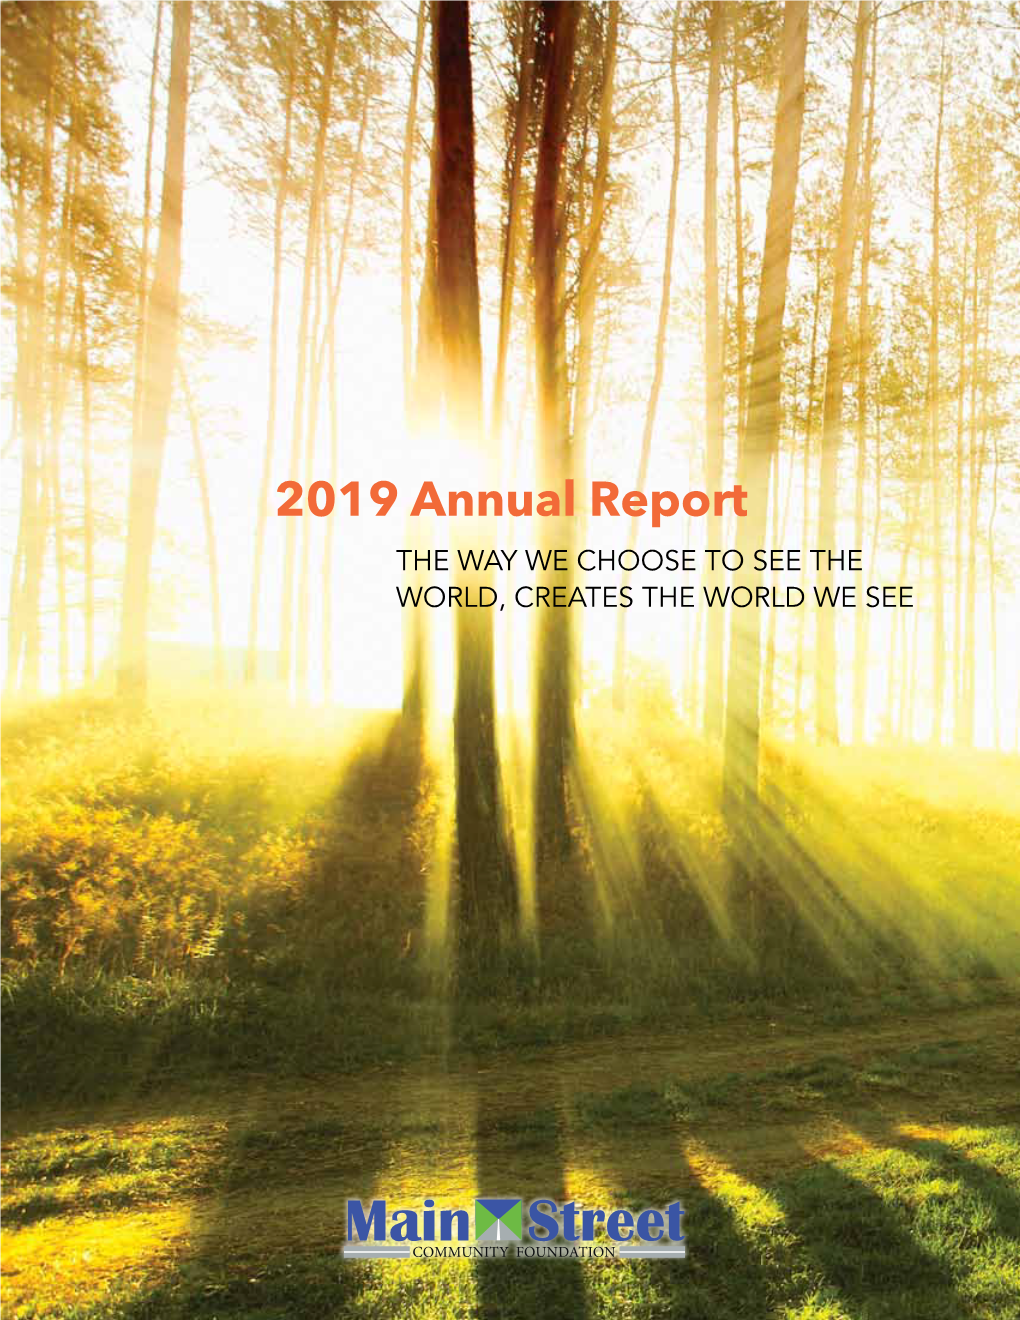 2019 Annual Report the Way We Choose to See the World, Creates the World We See Highlights of 2019